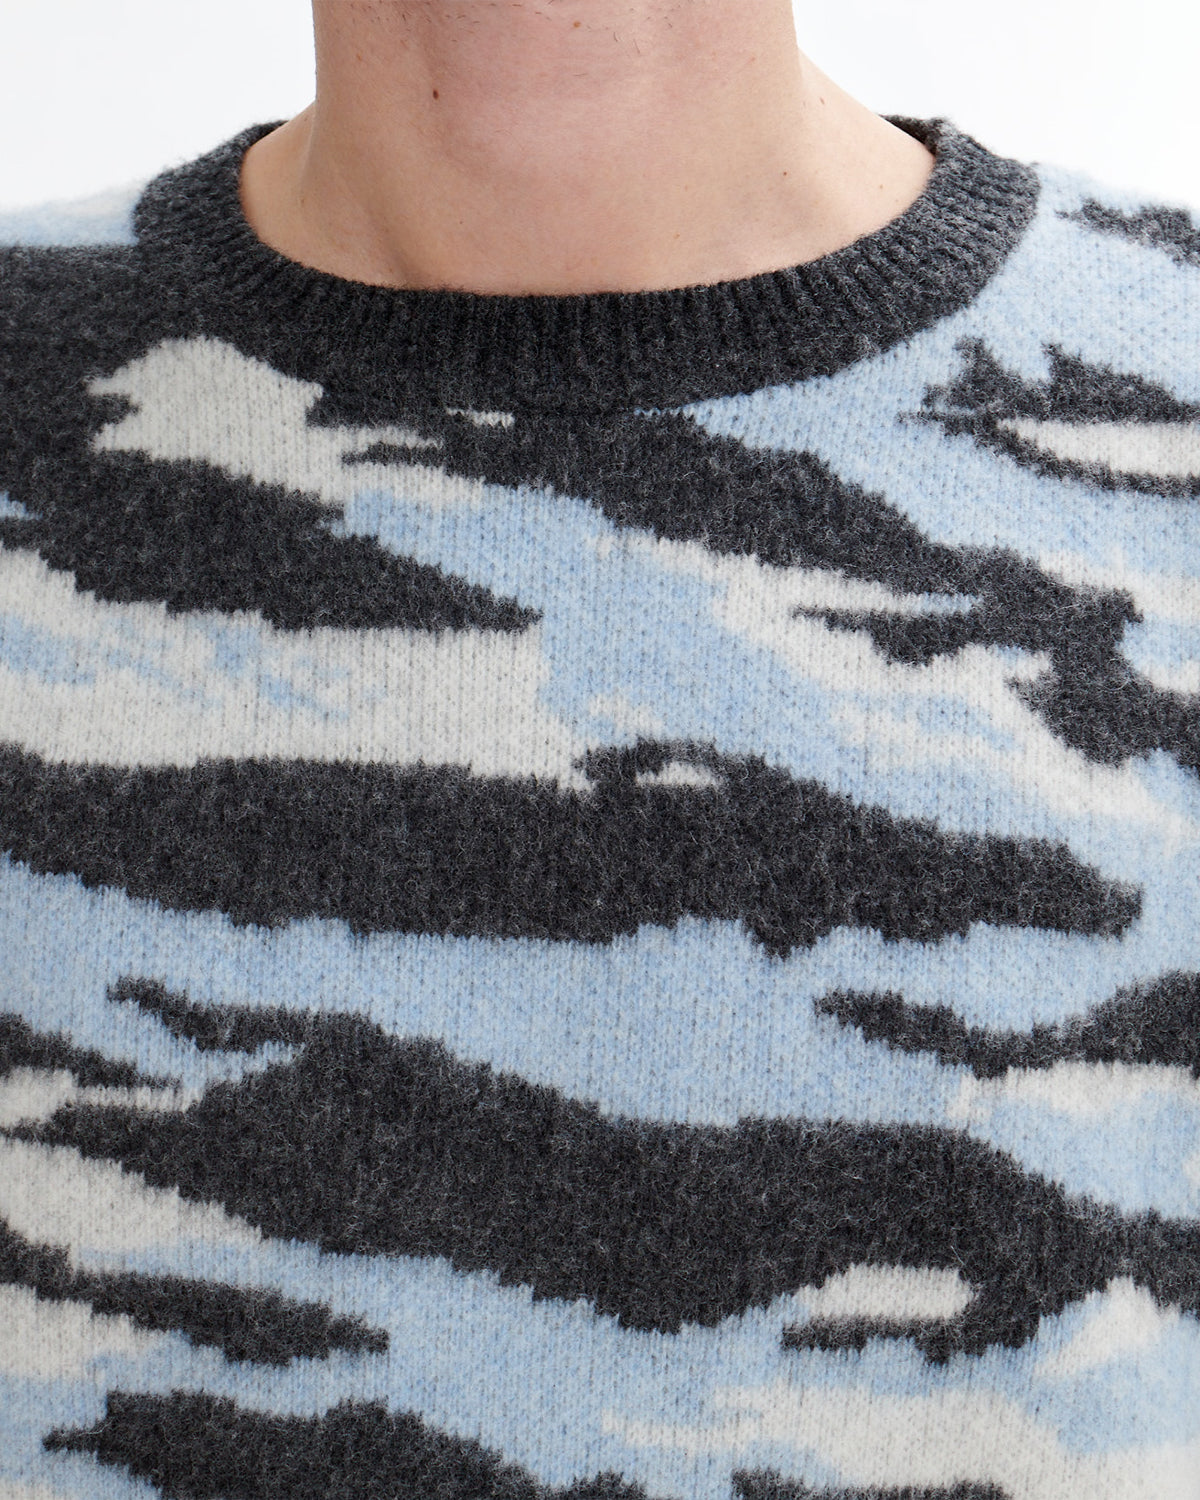 A.P.C. Pull Lionel Heathered Anthracite Knitwear Men